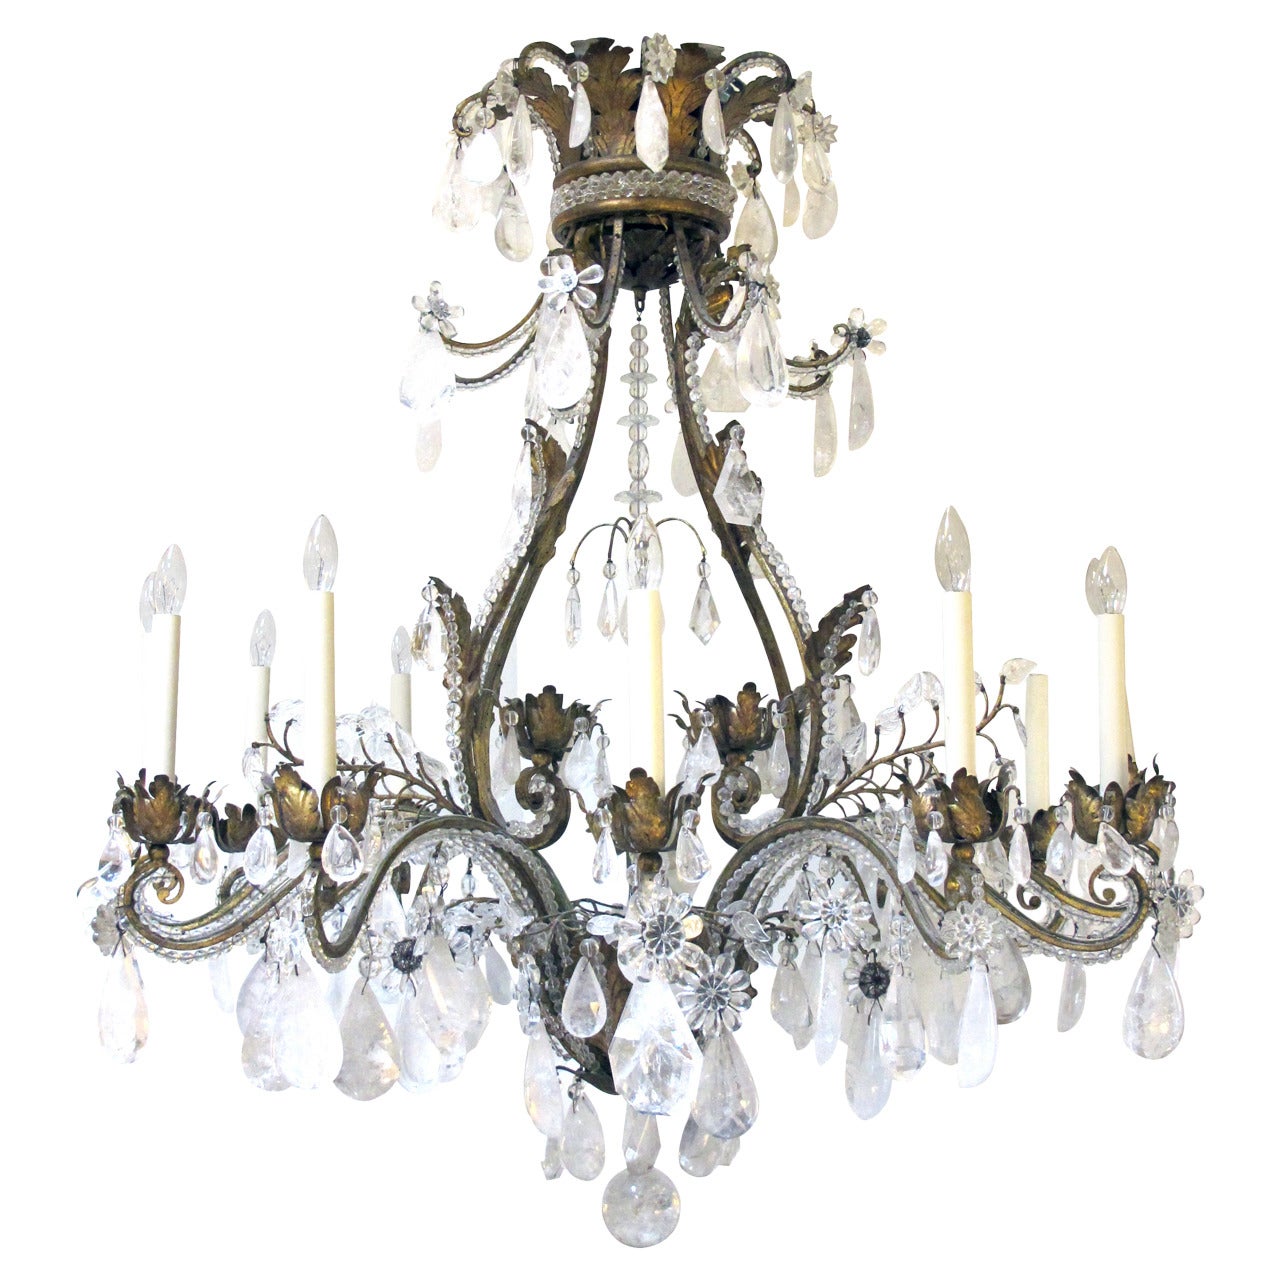 French Rococo Style Gilt-Iron & Rock Crystal 12-Light Chandelier, by Nesle, Inc.